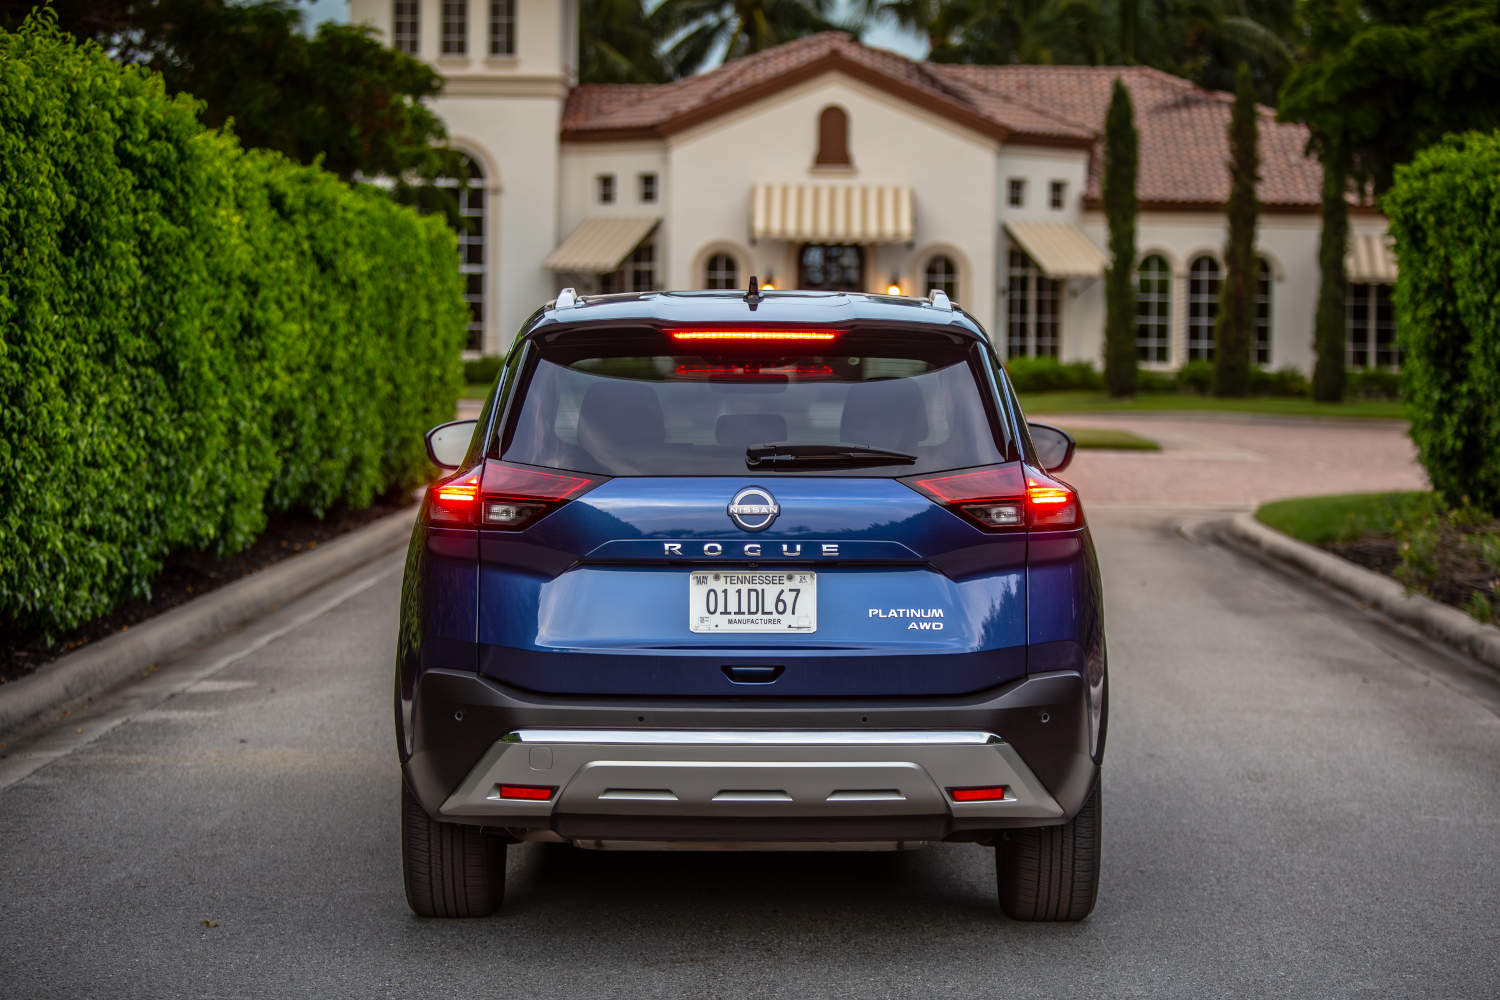 The best small SUV might be this 2023 Nissan Rogue